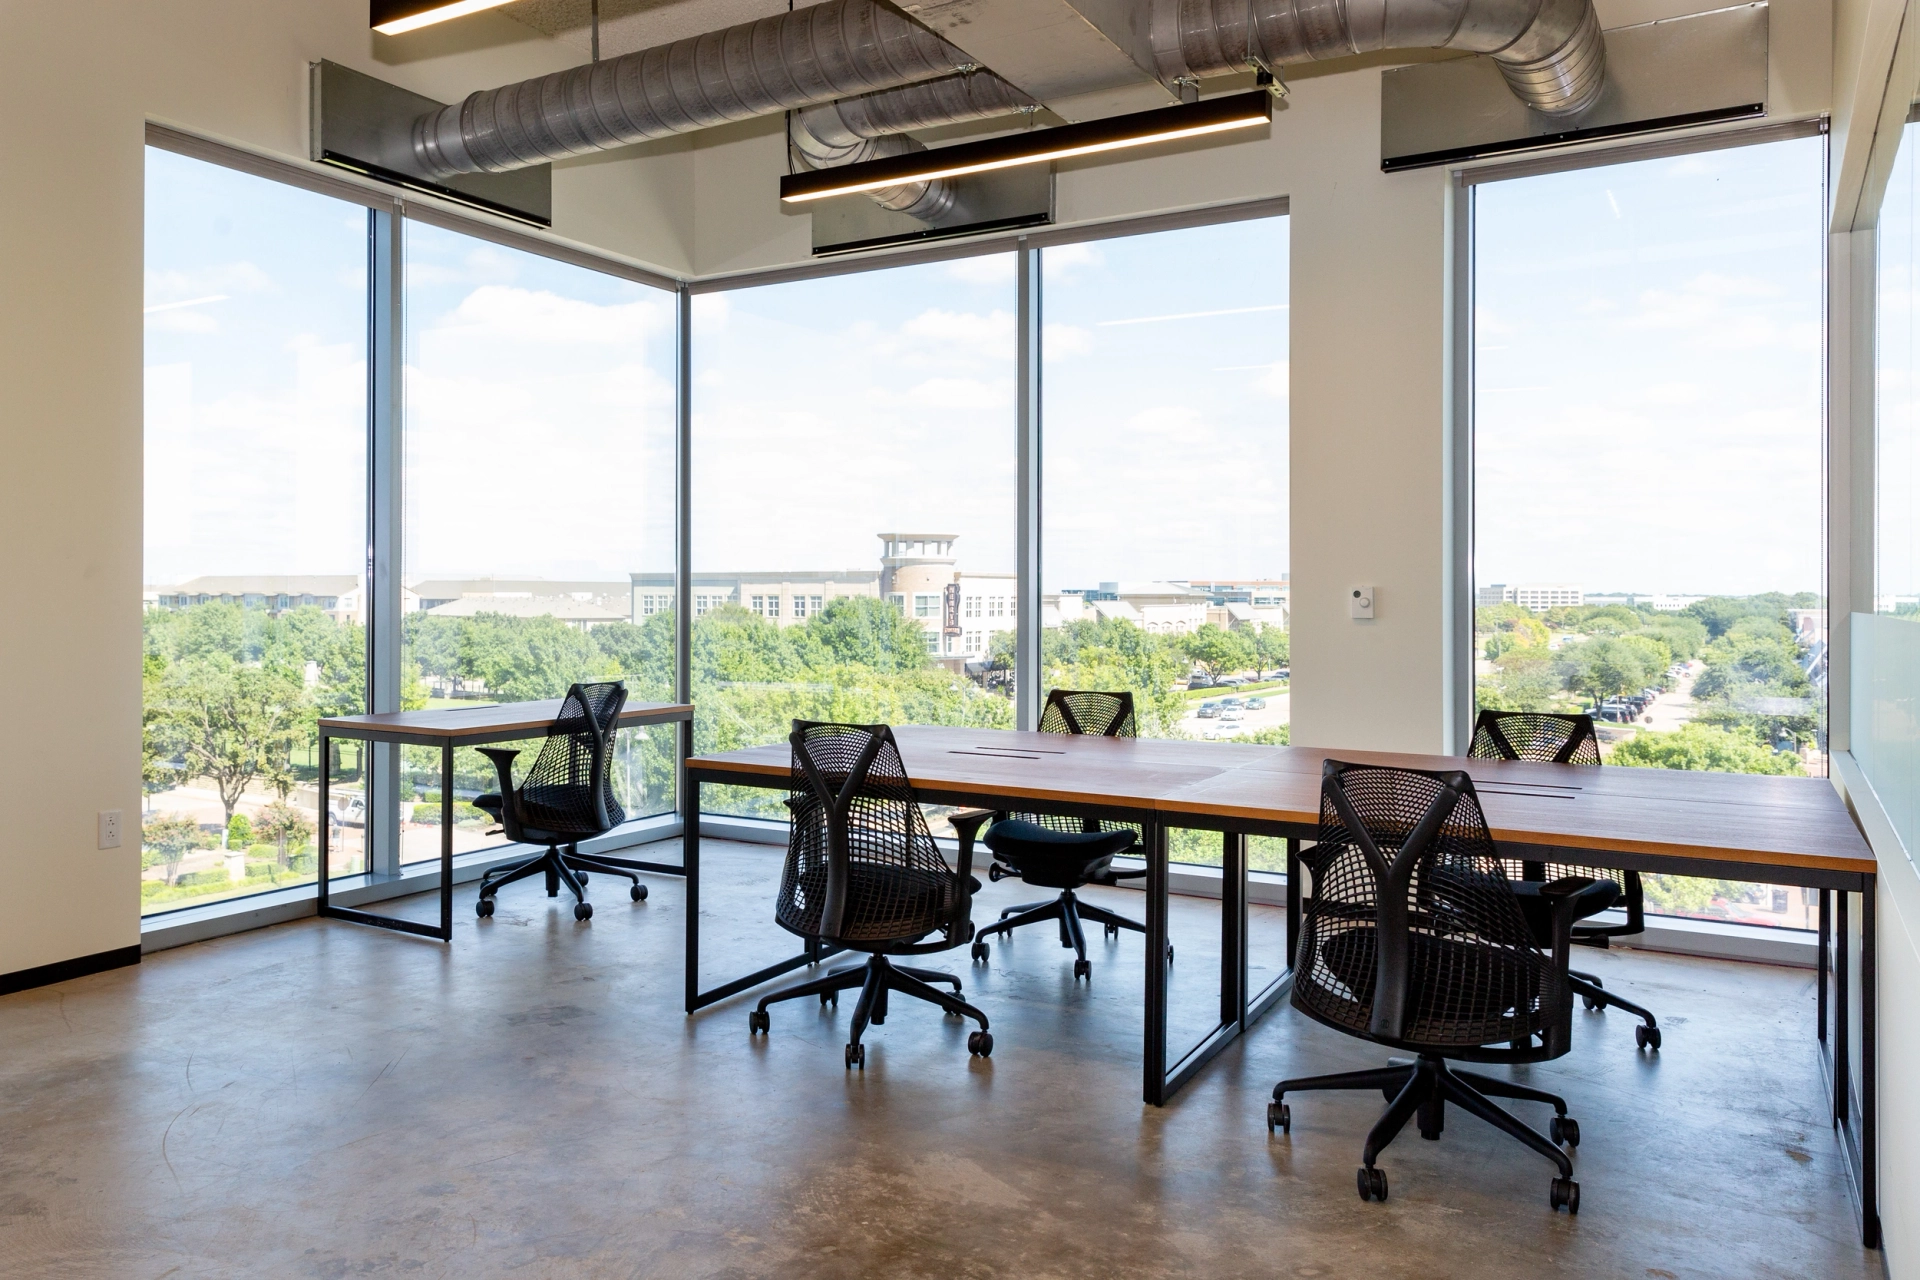 An office meeting room in Plano with large windows overlooking the city.